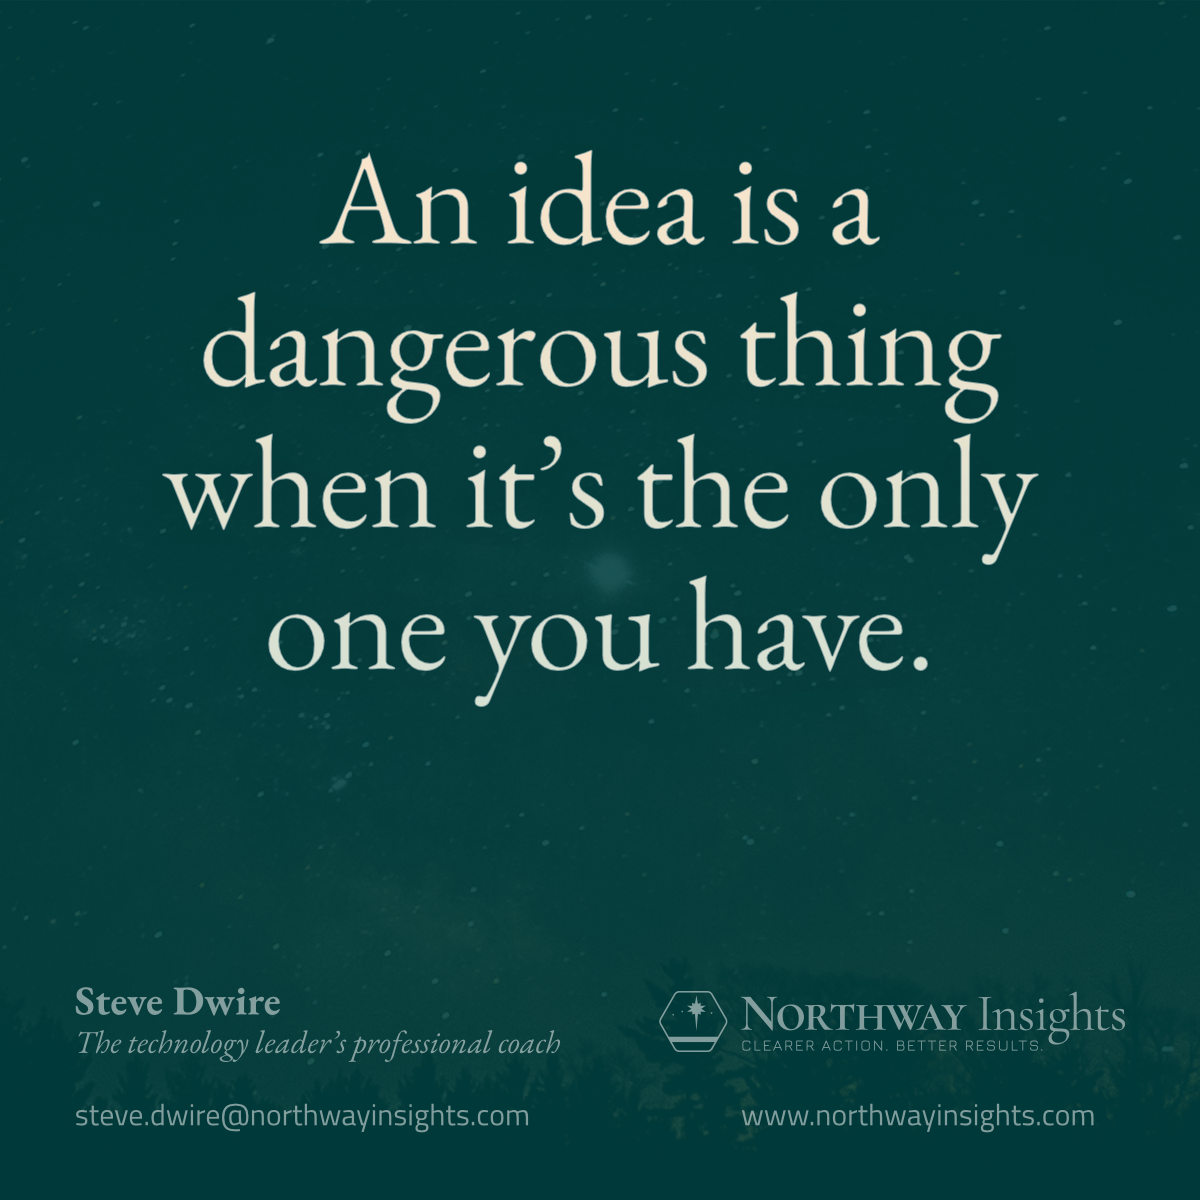 An idea is a dangerous thing when it’s the only one you have